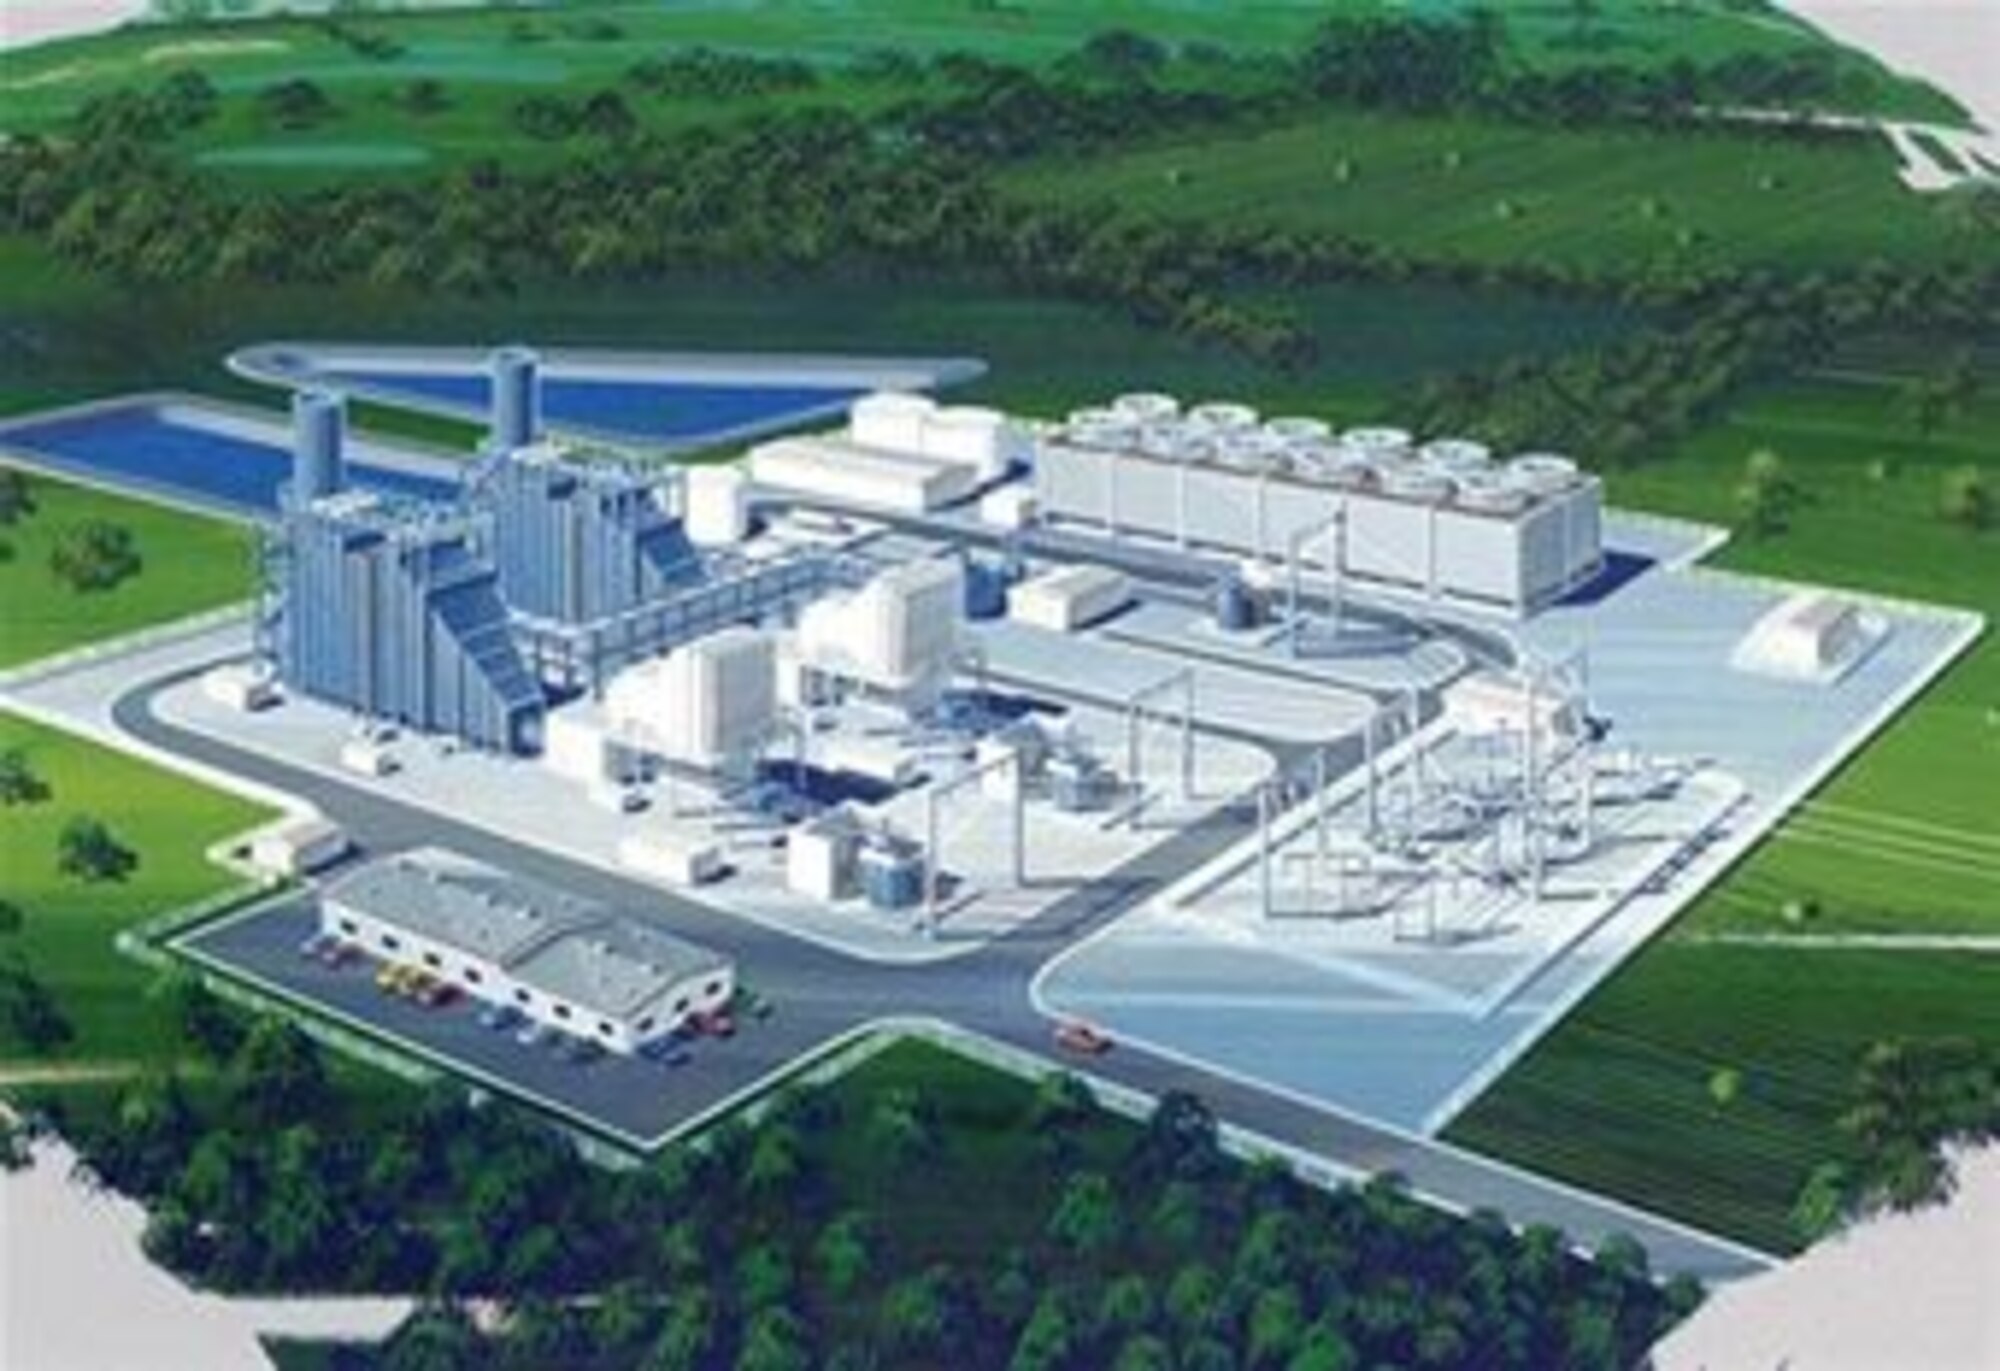 An artist rendering illustrates the proposed energy park, part of the
Enhanced Use Lease program, at Joint Base McGuire-Dix-Lakehurst, N.J. Once
complete, the project is expected to generate at least 50 to 60 megawatts of
renewable energy, putting the Air Force several steps closer to reaching the
Air Force-wide goal of generating one gigawatt of renewable energy by 2020.
(Courtesy graphic) 